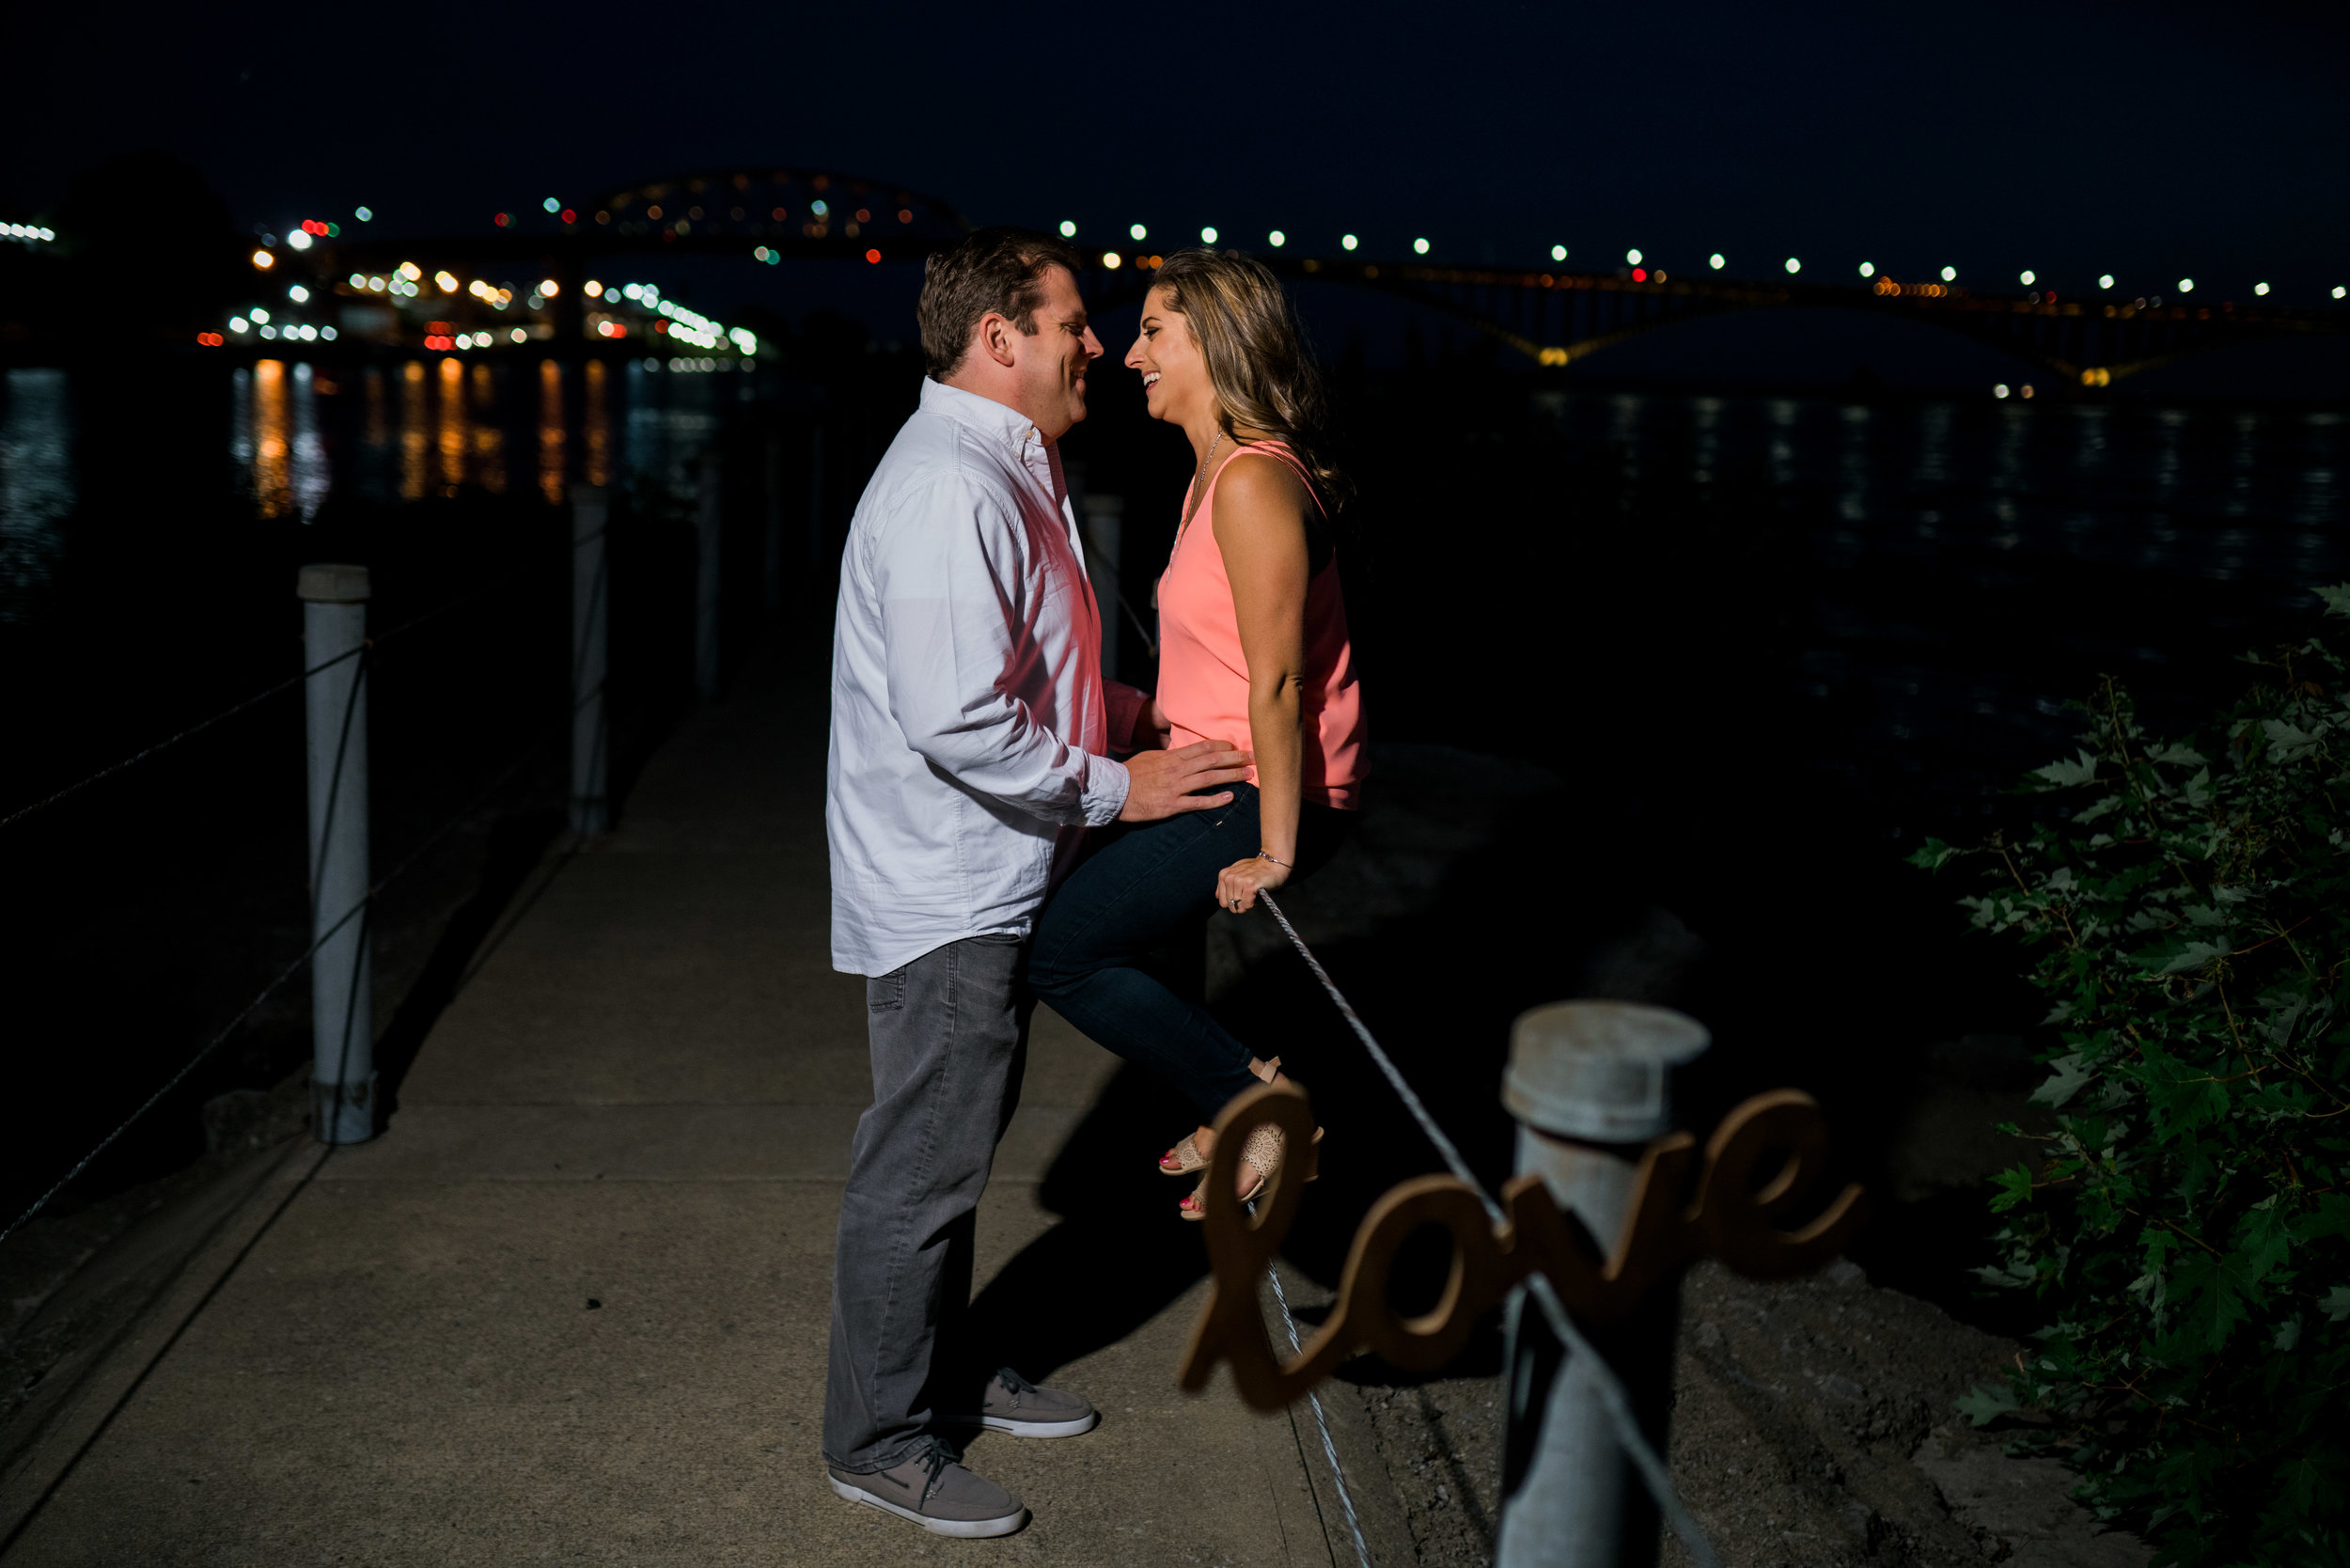 Nancy and David Engagement Photography by Stefan Ludwig in Buffalo NY-48.jpg